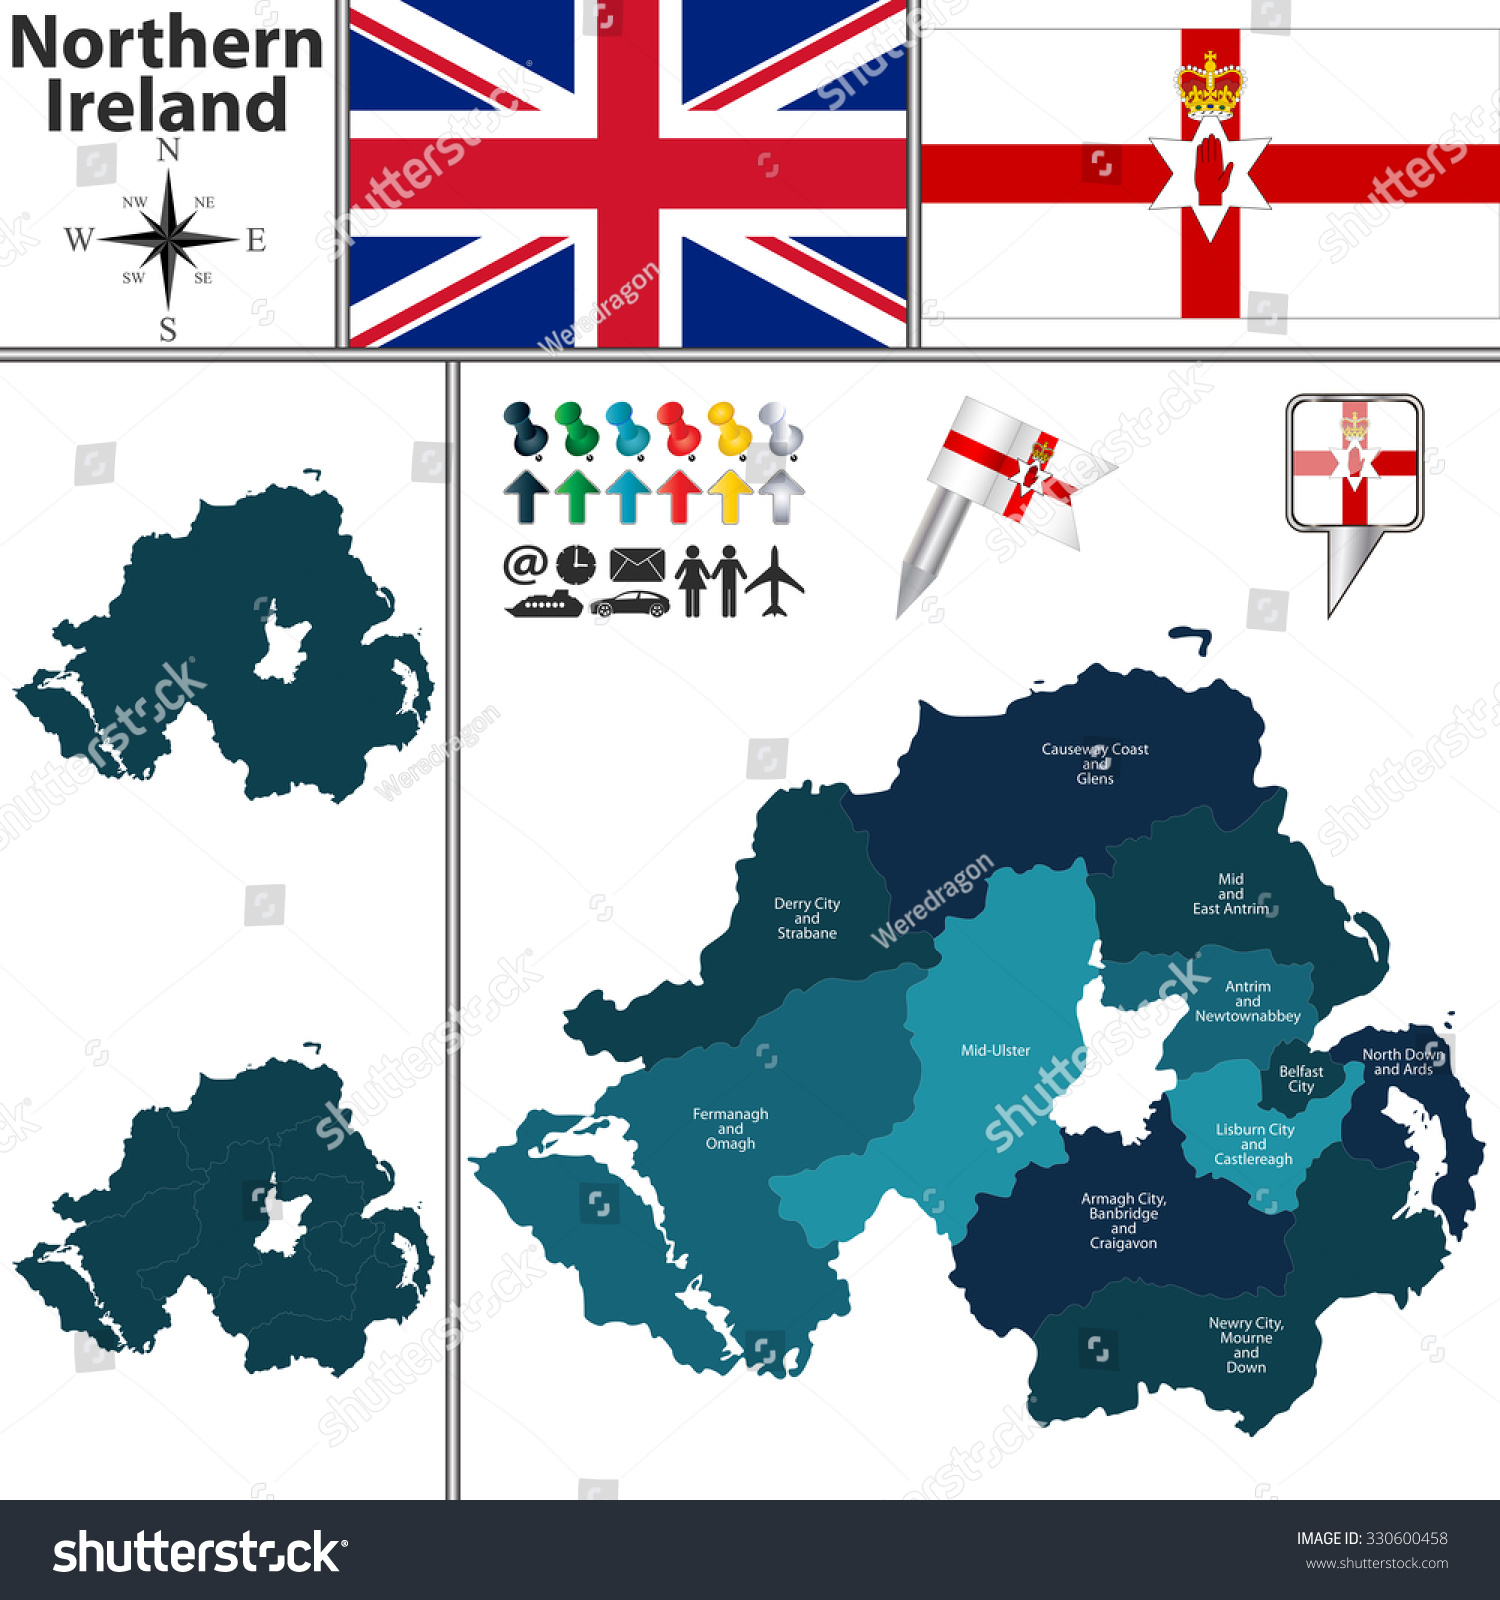 Vector Map Of Northern Ireland With Subdivisions And Flags - 330600458 ...